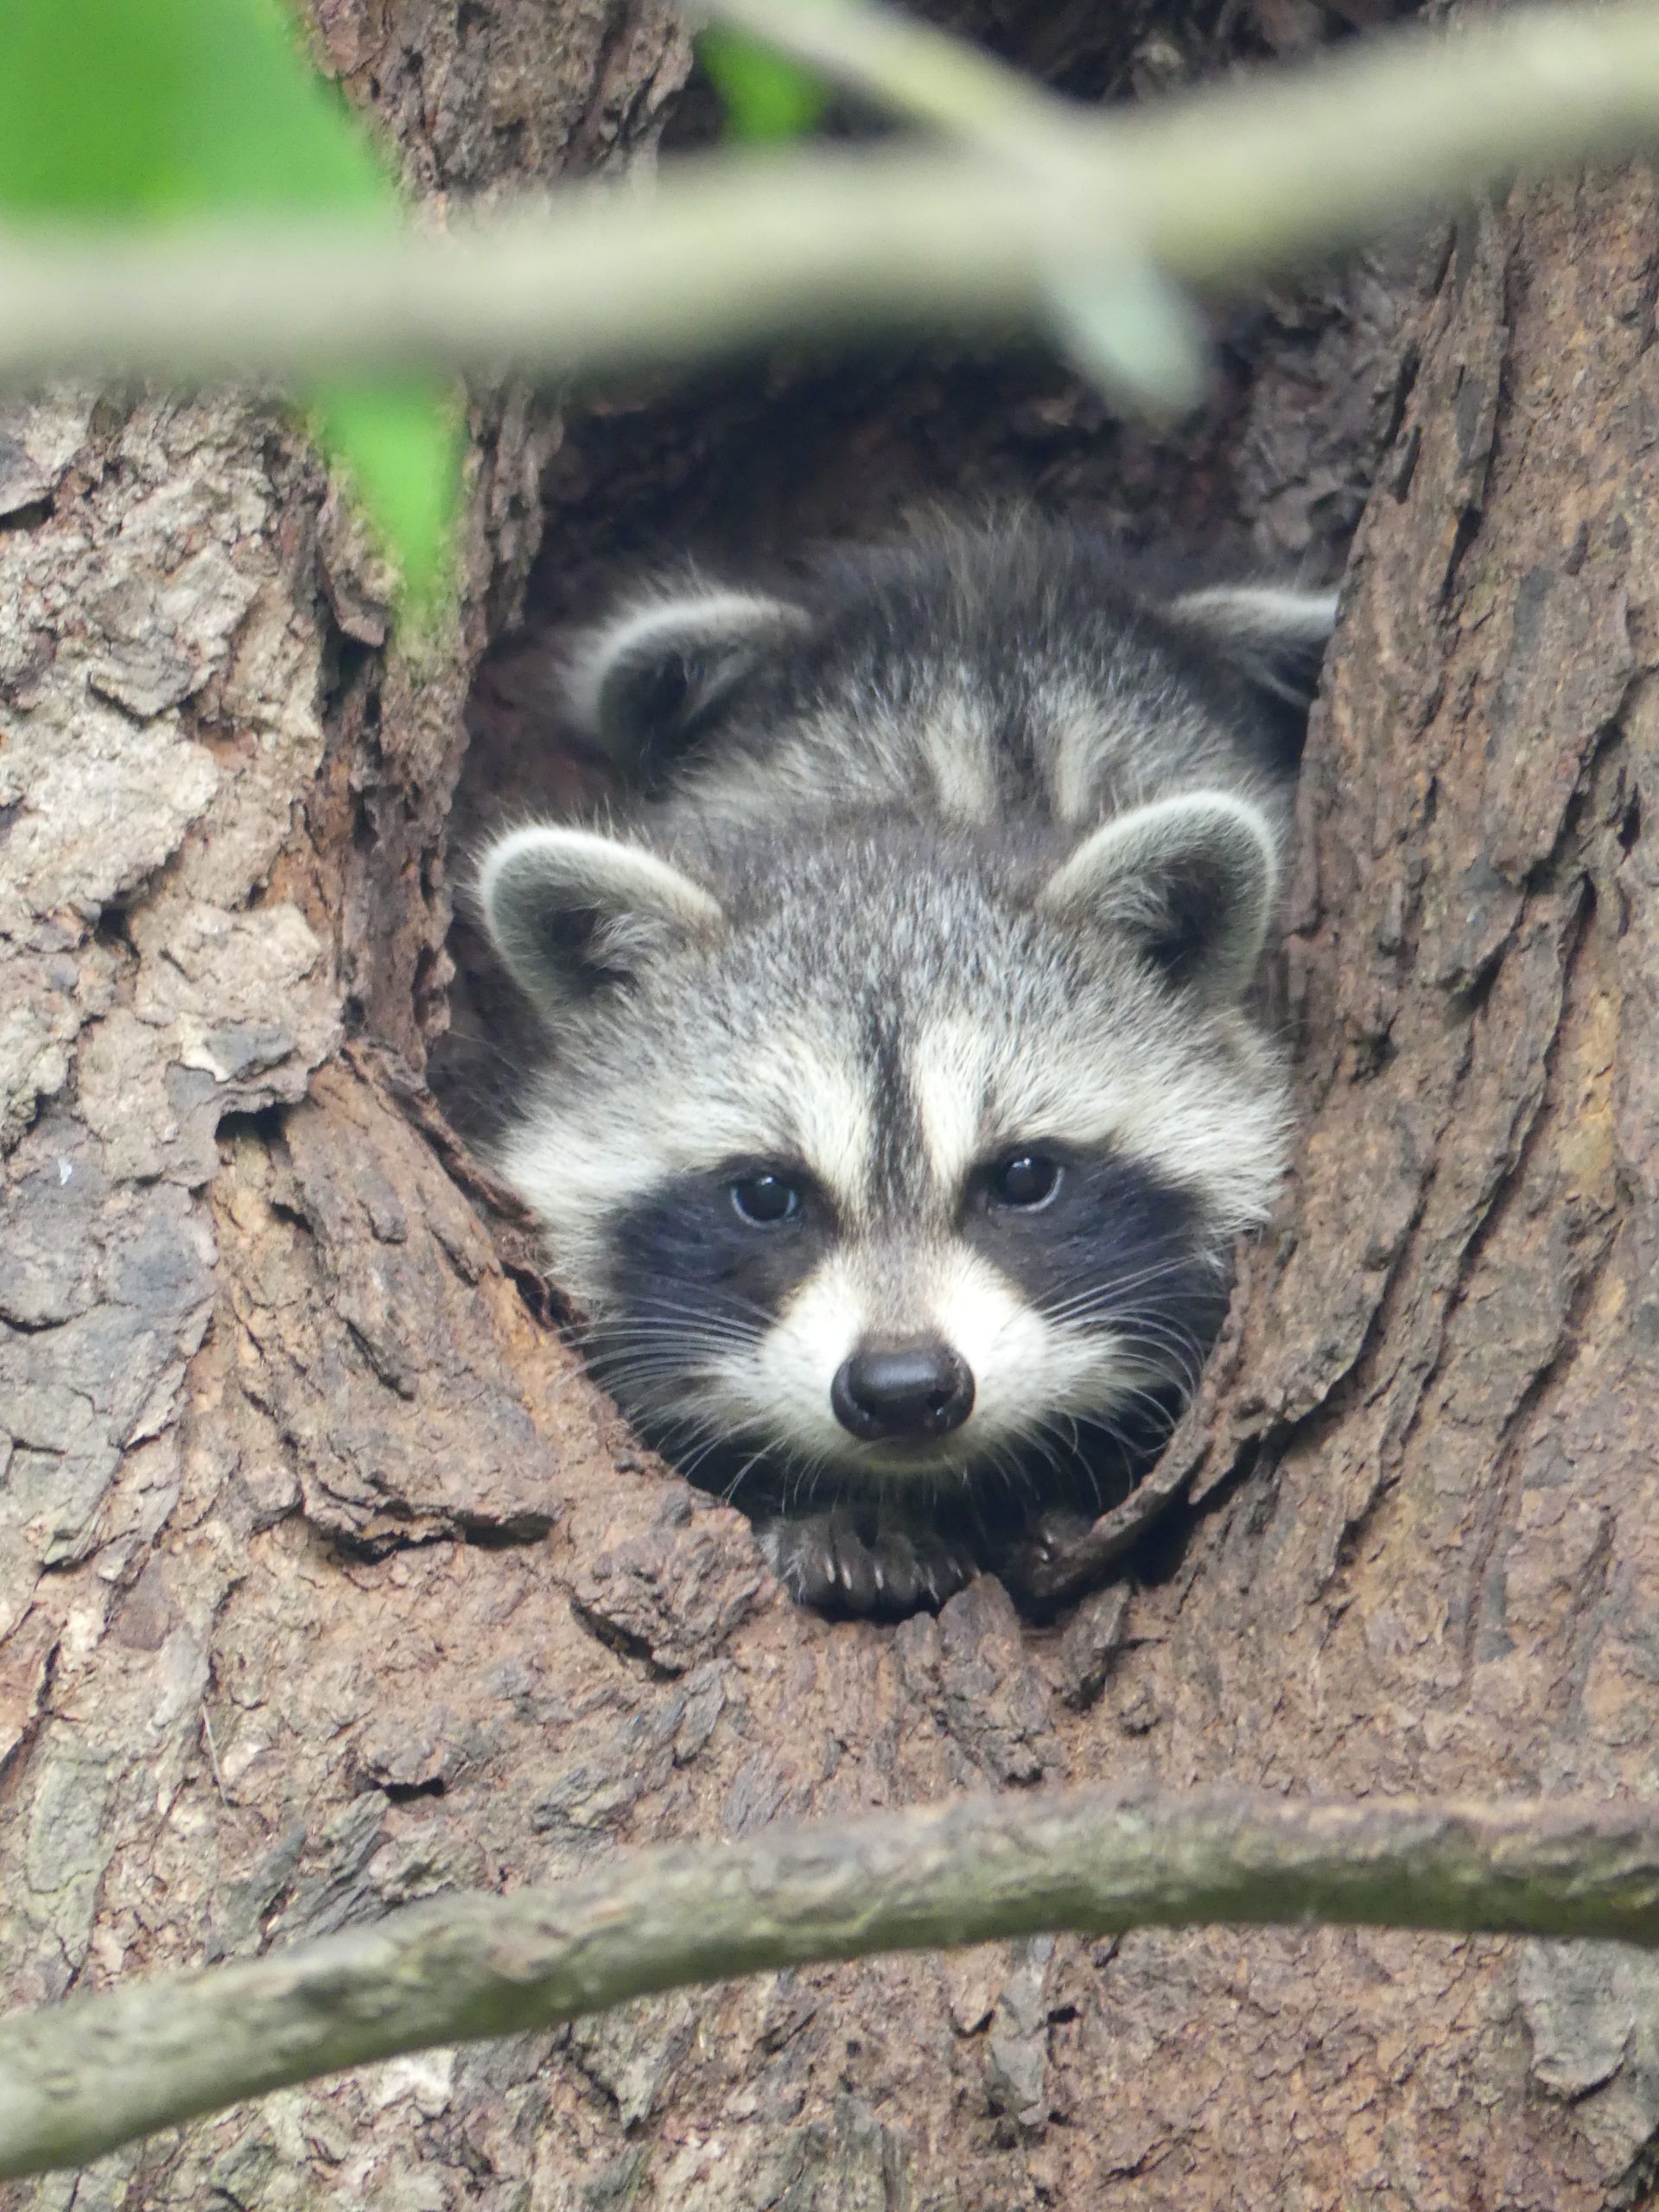 While raccoons can be very cute they can also be very destructive in the vegetable garden. Some repellants may work, but never trap raccoons as they can bite and carry rabies.